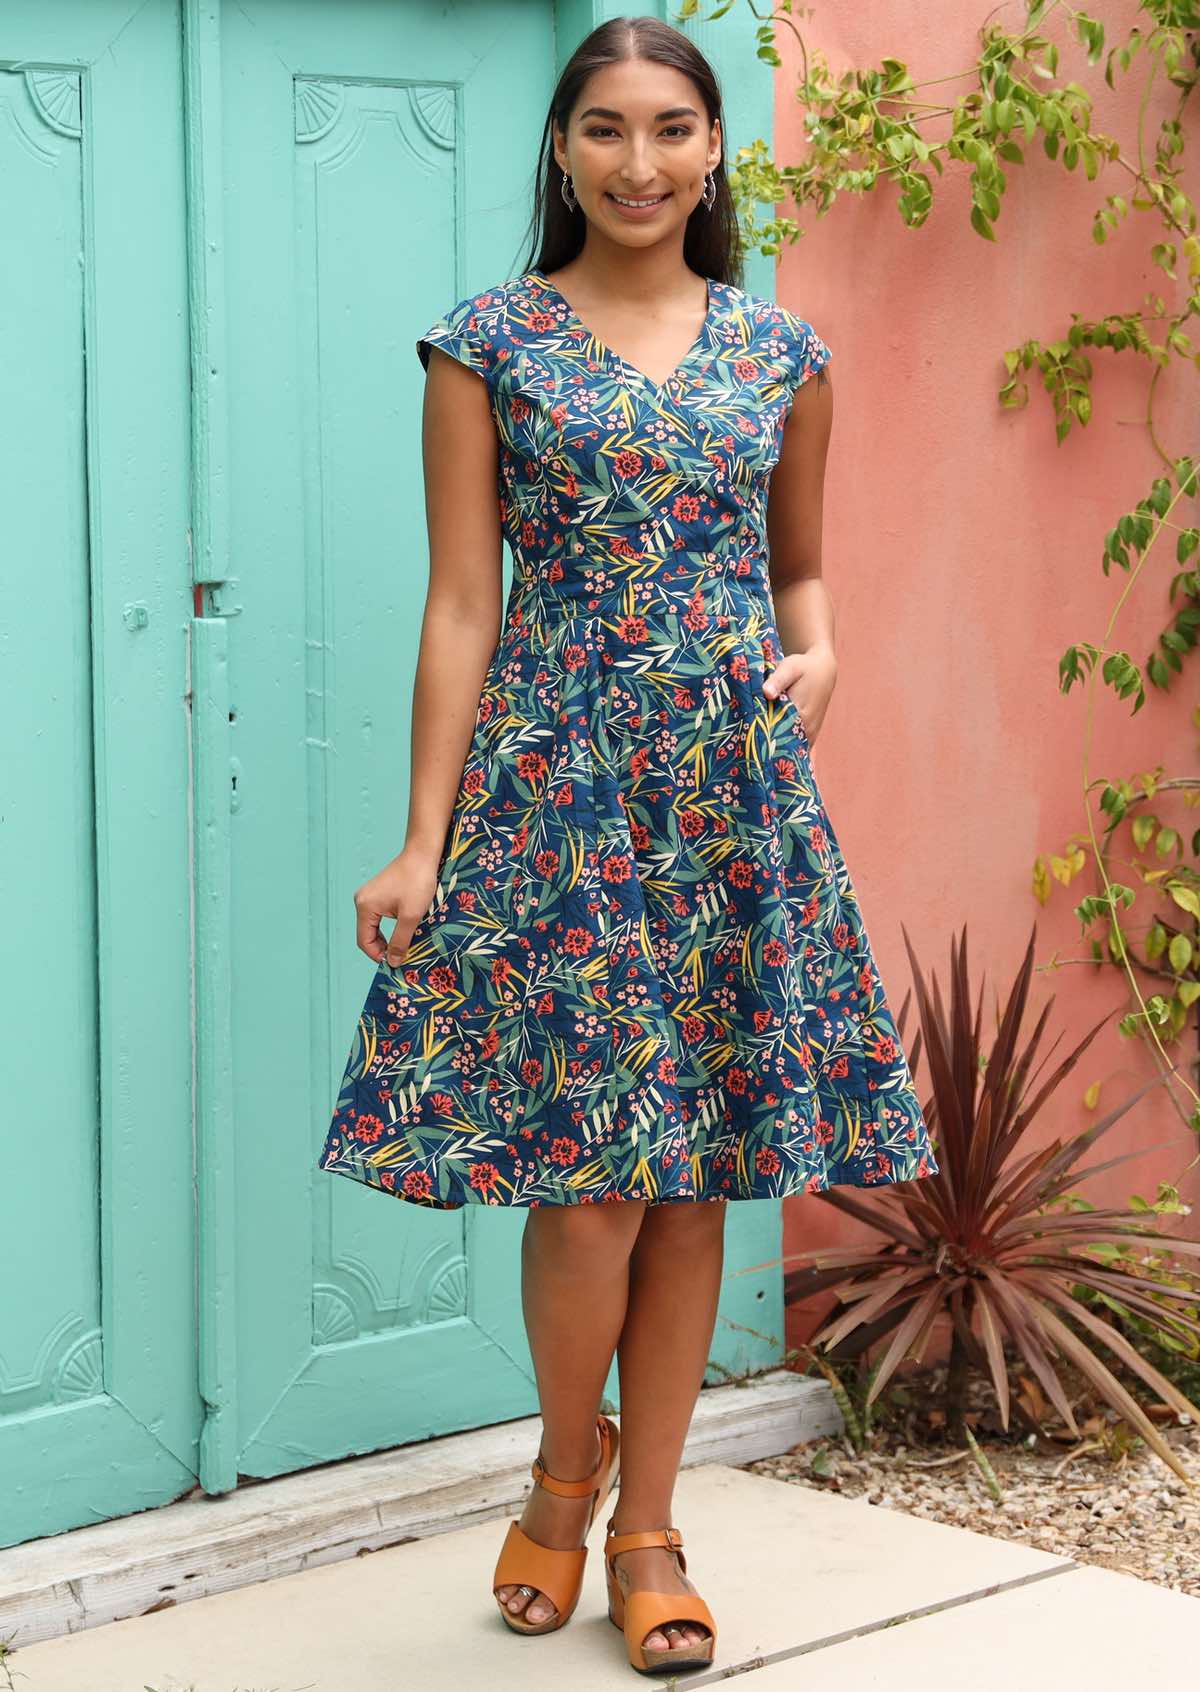 Model pairs 100% cotton dress with sandals. 